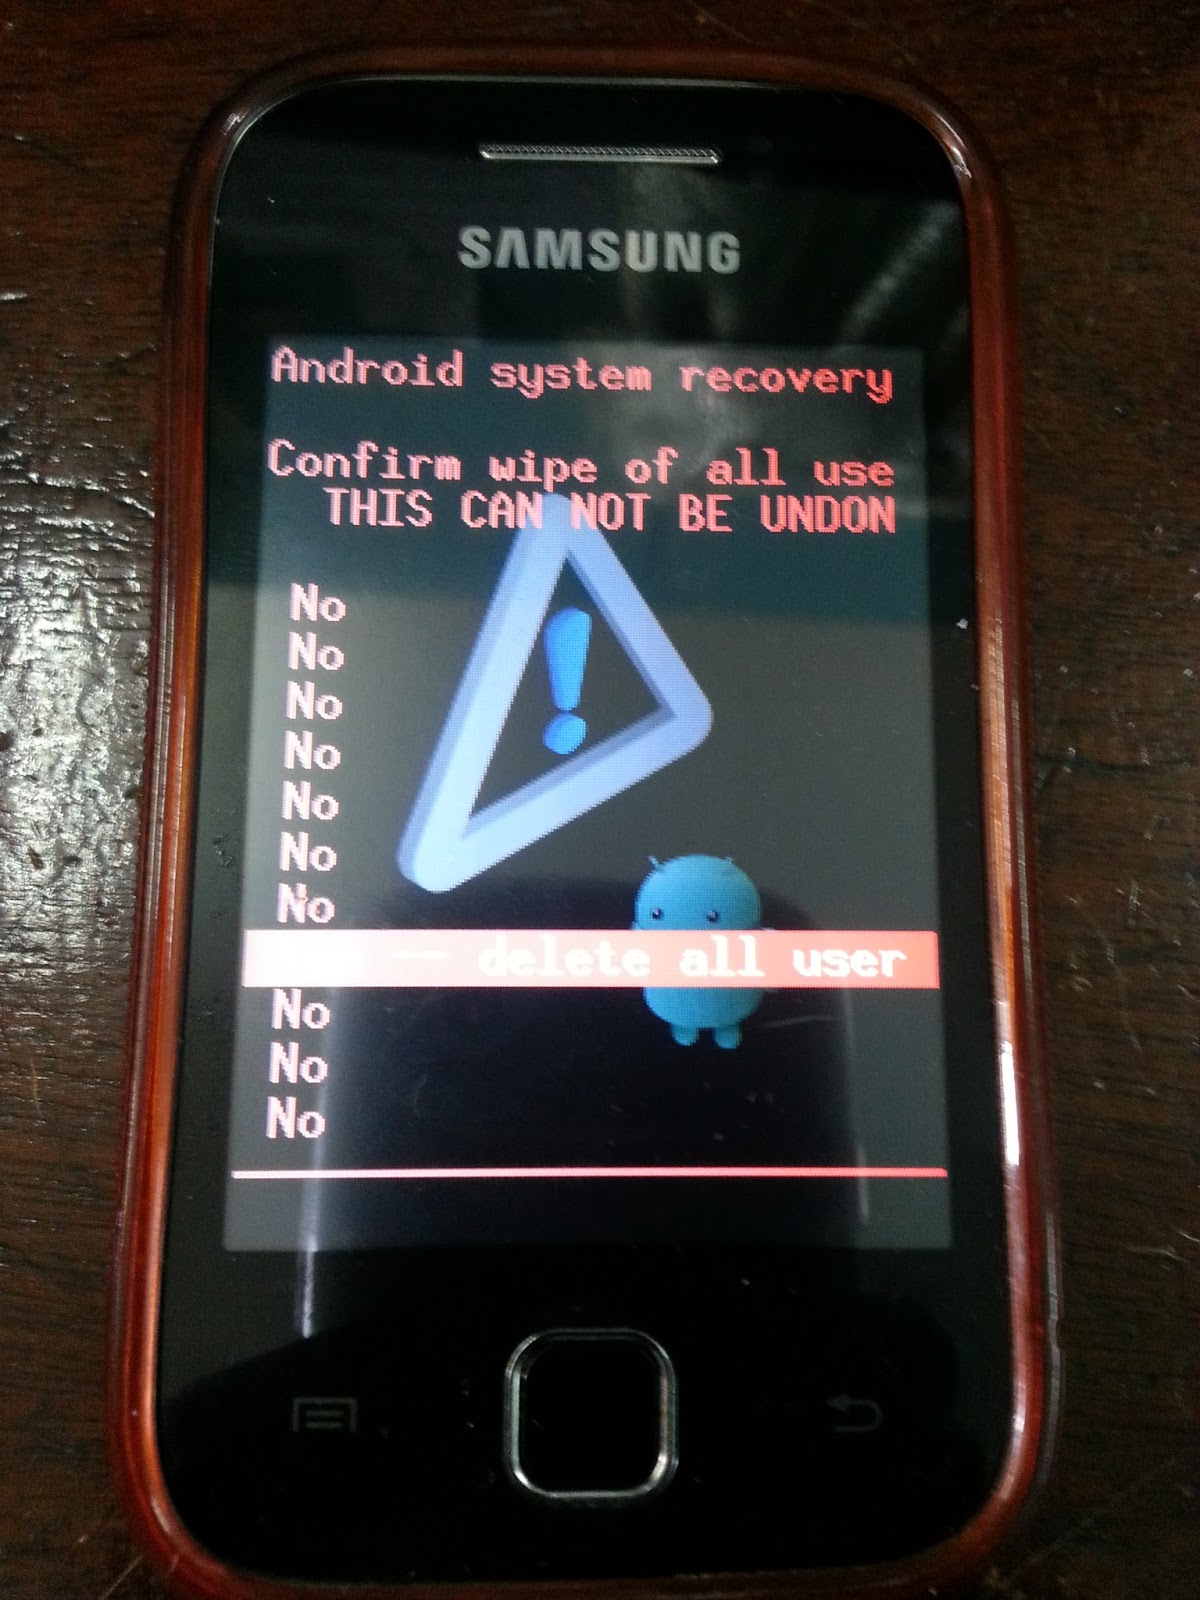 ... Samsung Galaxy after Too many pattern Attempts or Forgotten Password